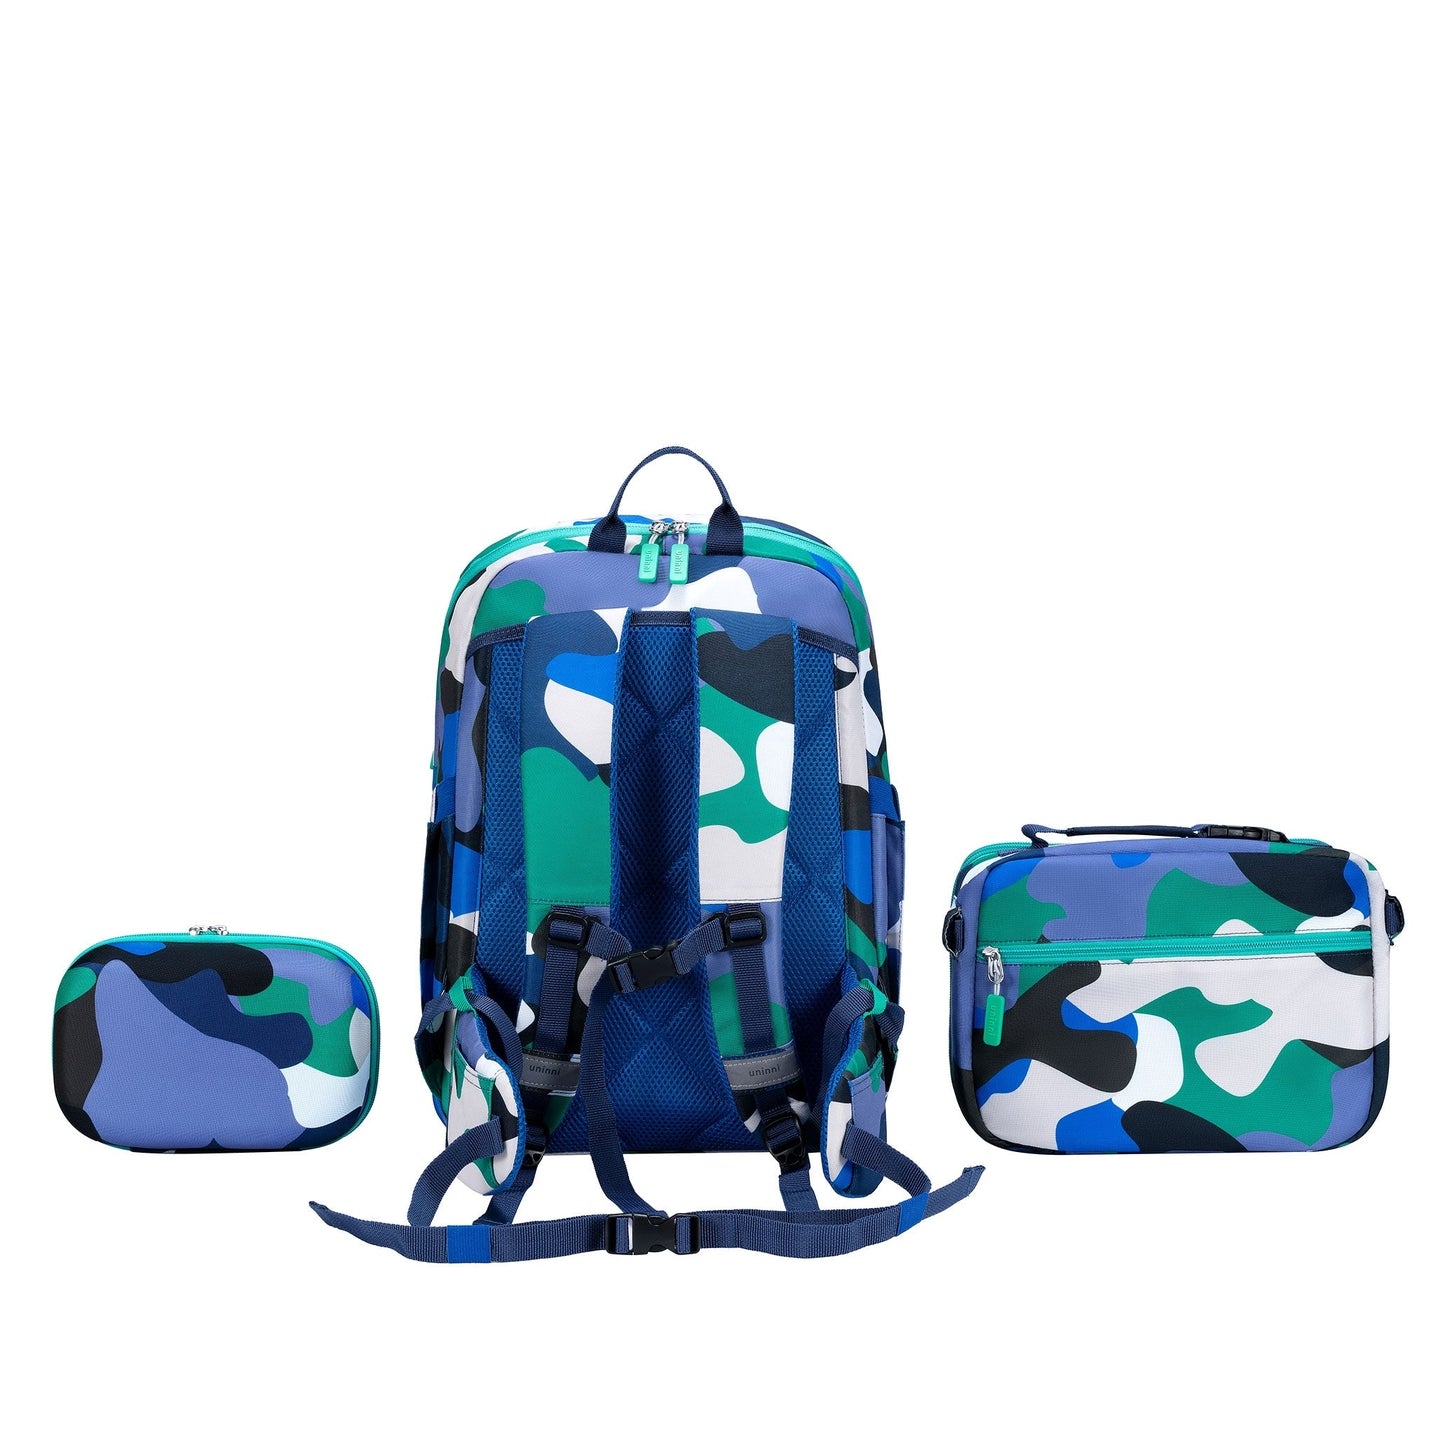 Matching Backpack, Lunch Tote, & Pencil Case by Uninni - Camo